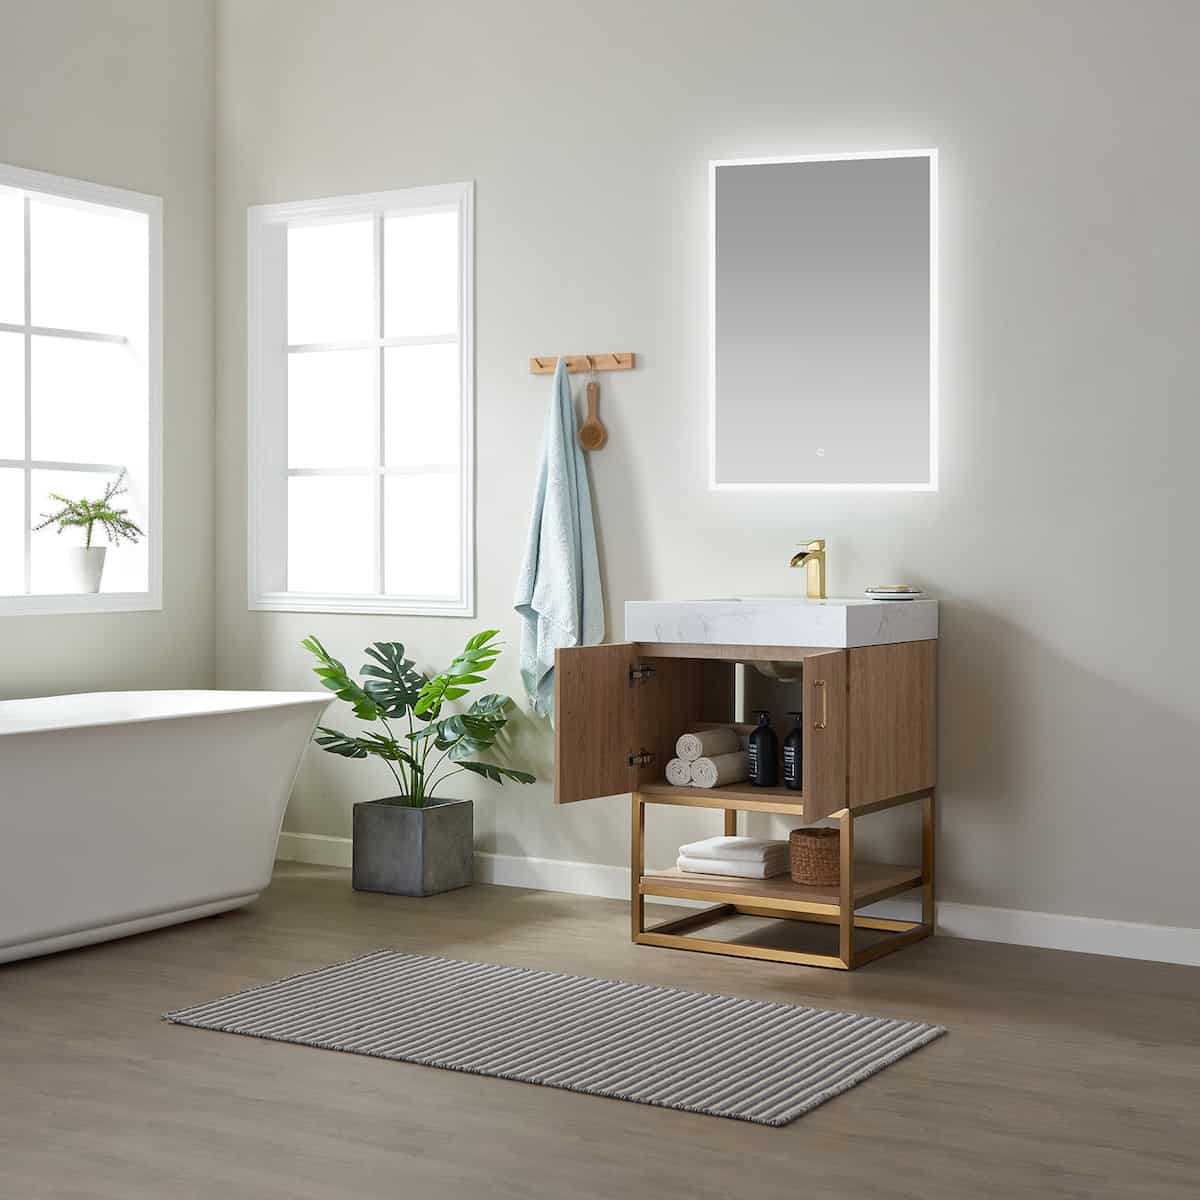 Vinnova Alistair 24 Inch Freestanding Single Vanity in North American Oak and Brushed Gold Frame with White Grain Stone Countertop With Mirror Inside 789024-NO-GW